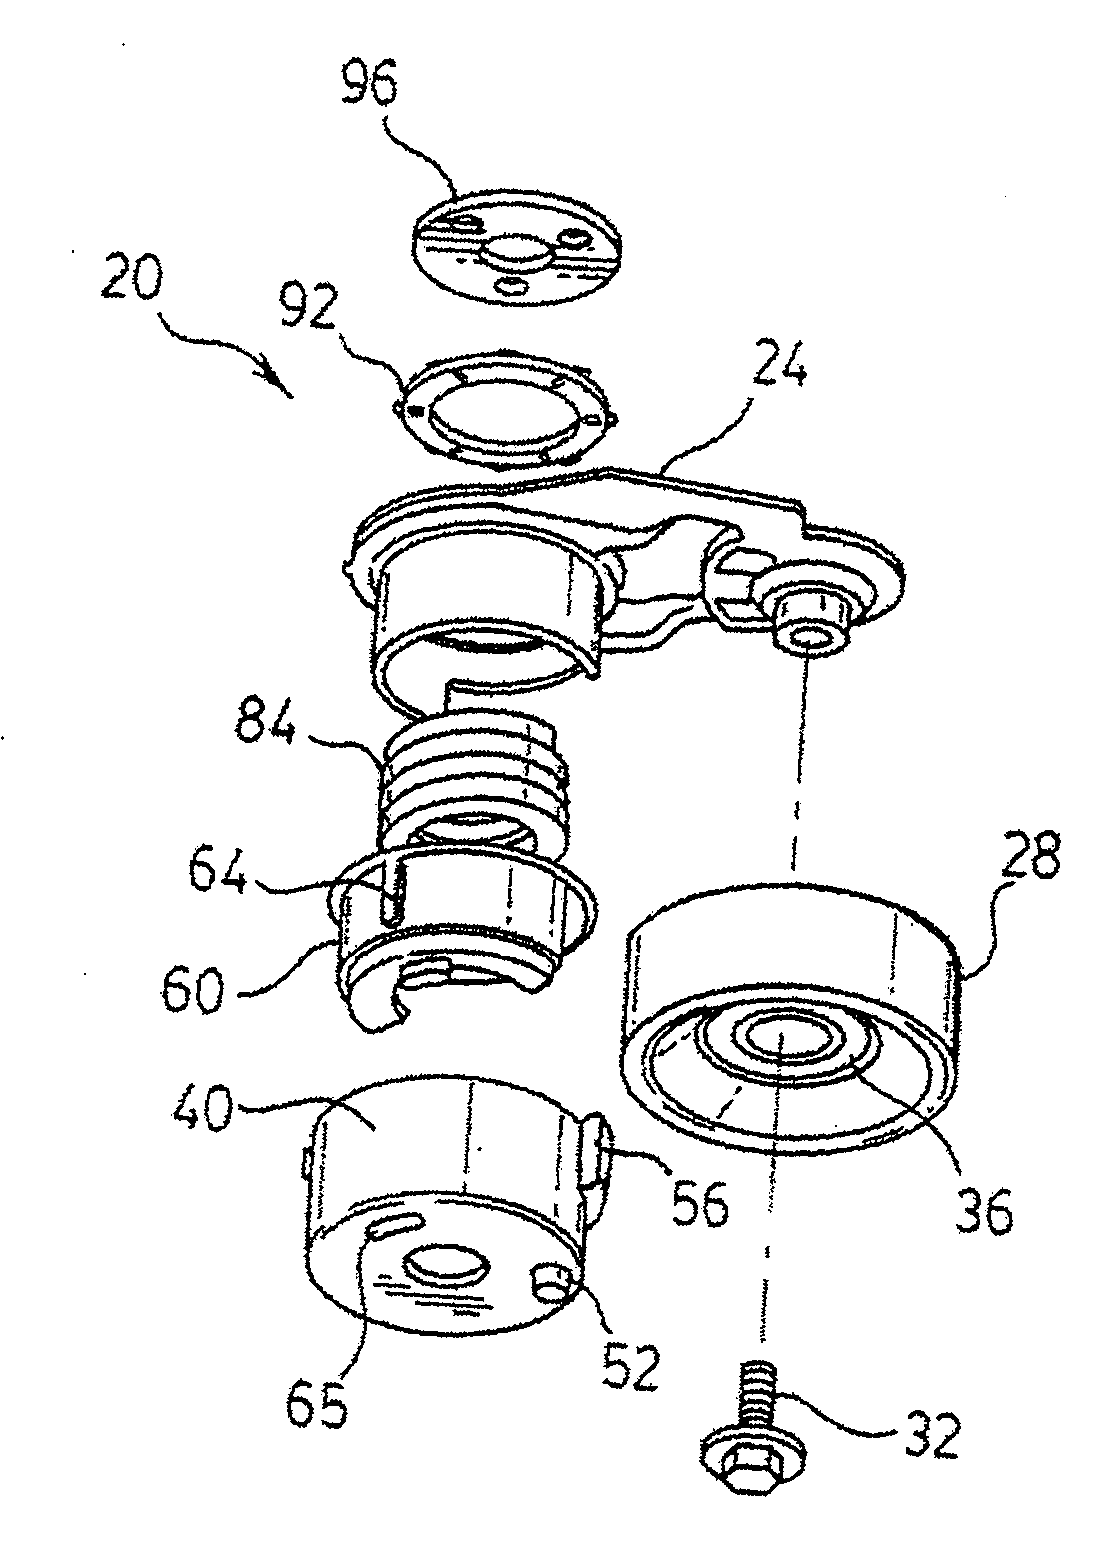 Tensioner For Flexible Drives